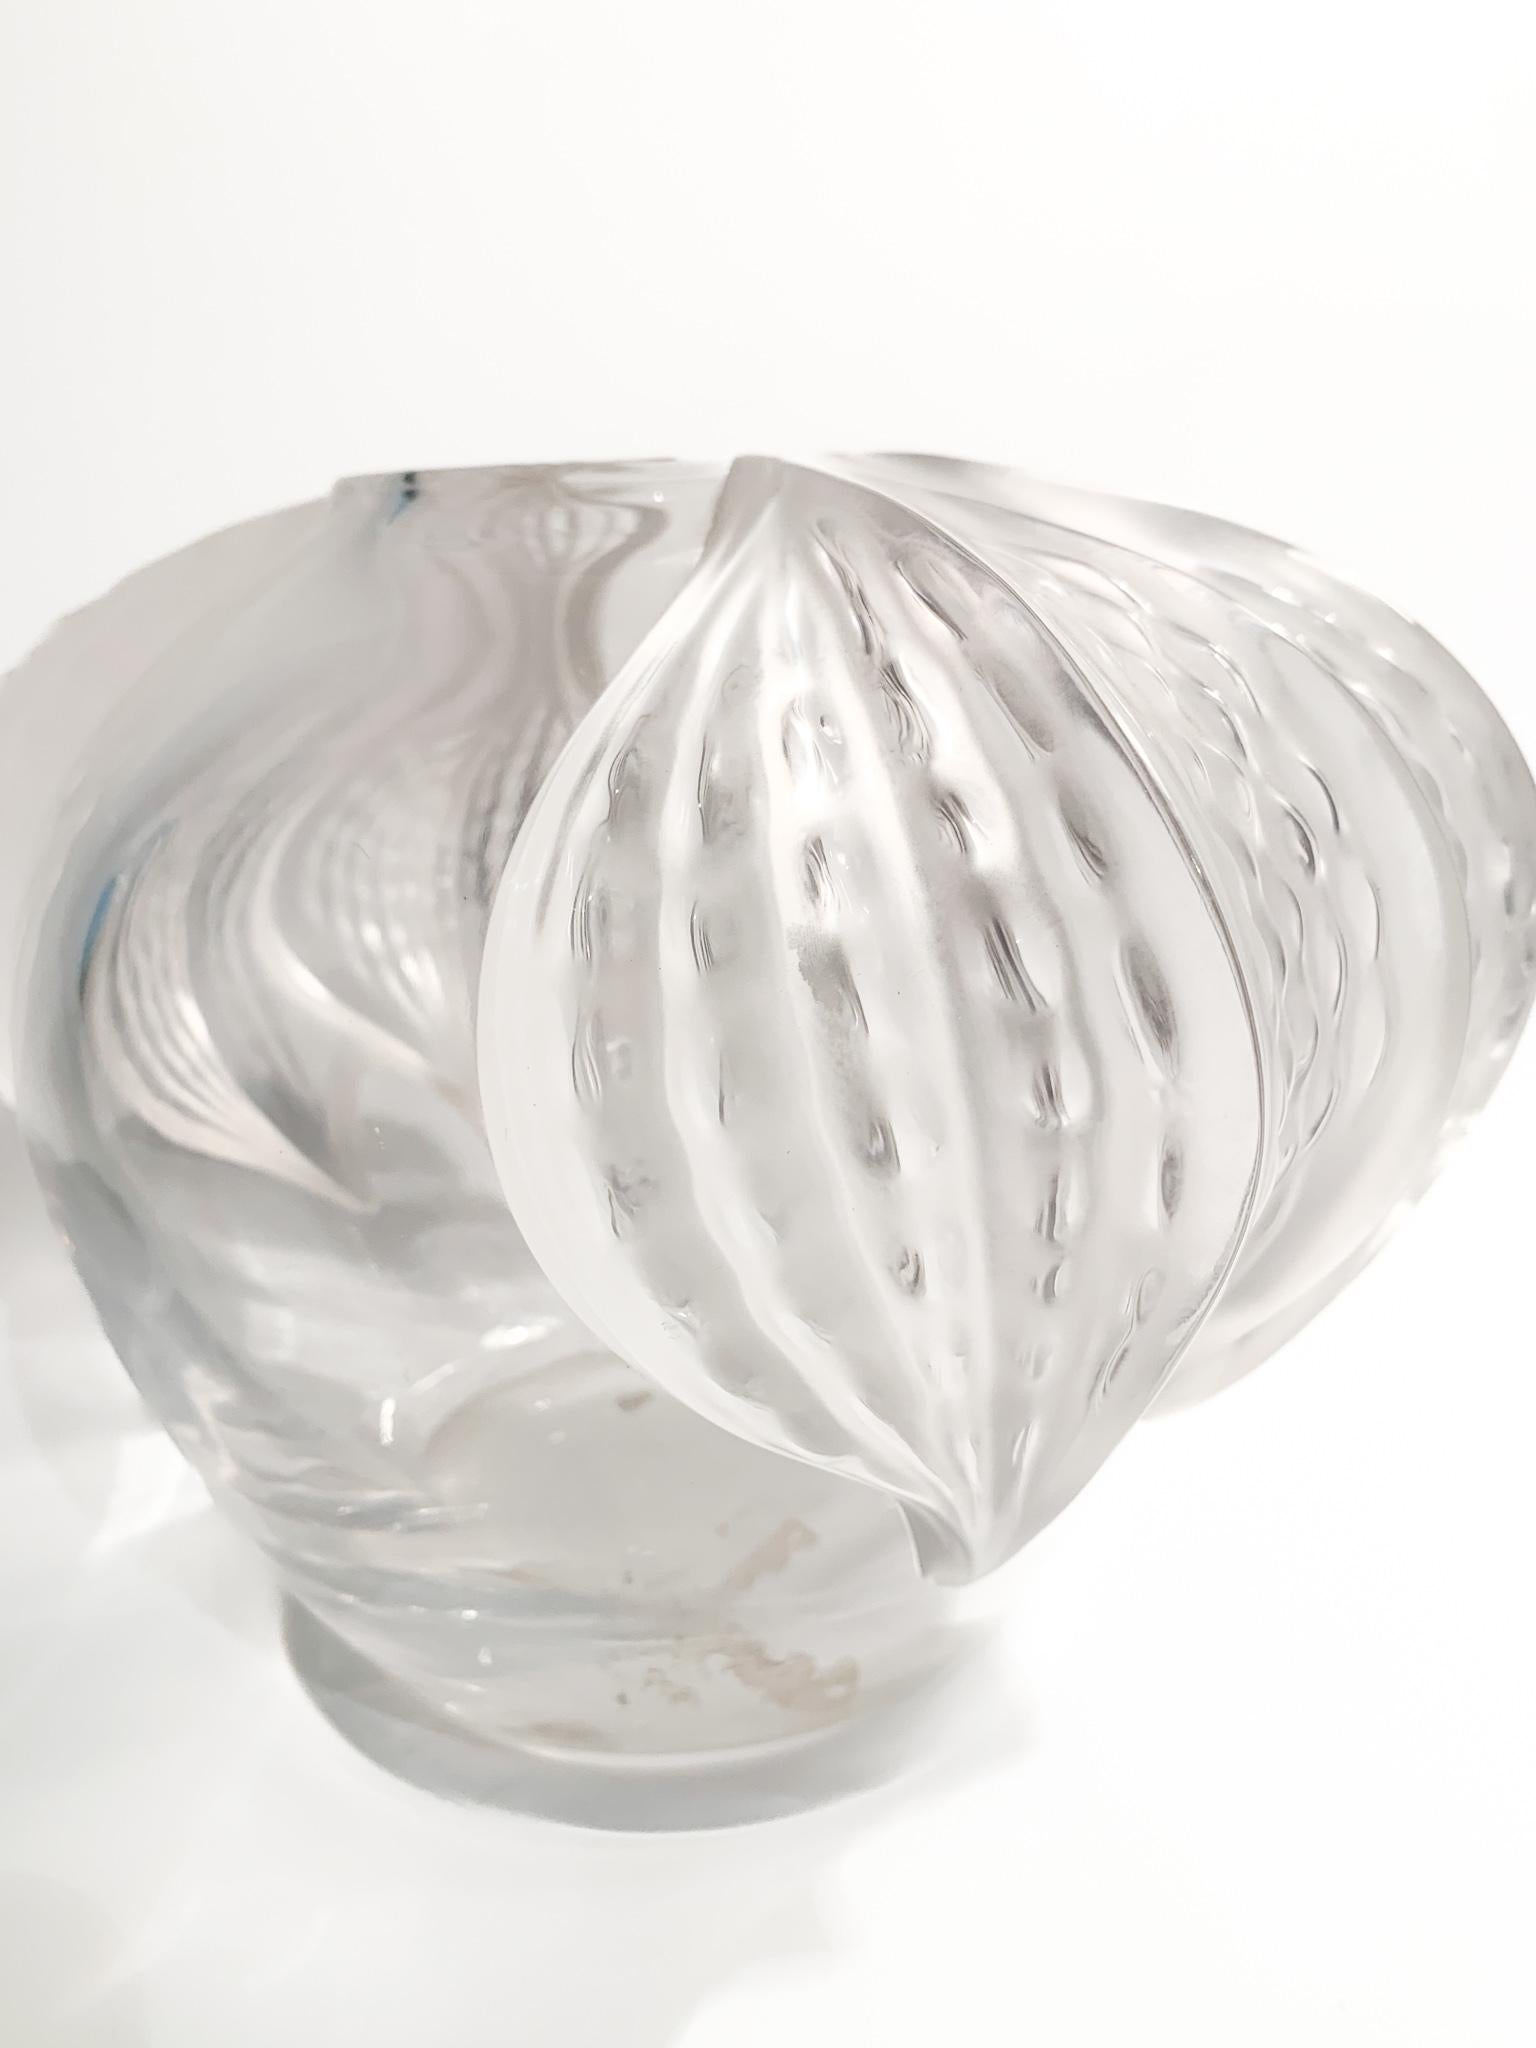 French Lalique Crystal Vase, San Diego Model, 1940s For Sale 3